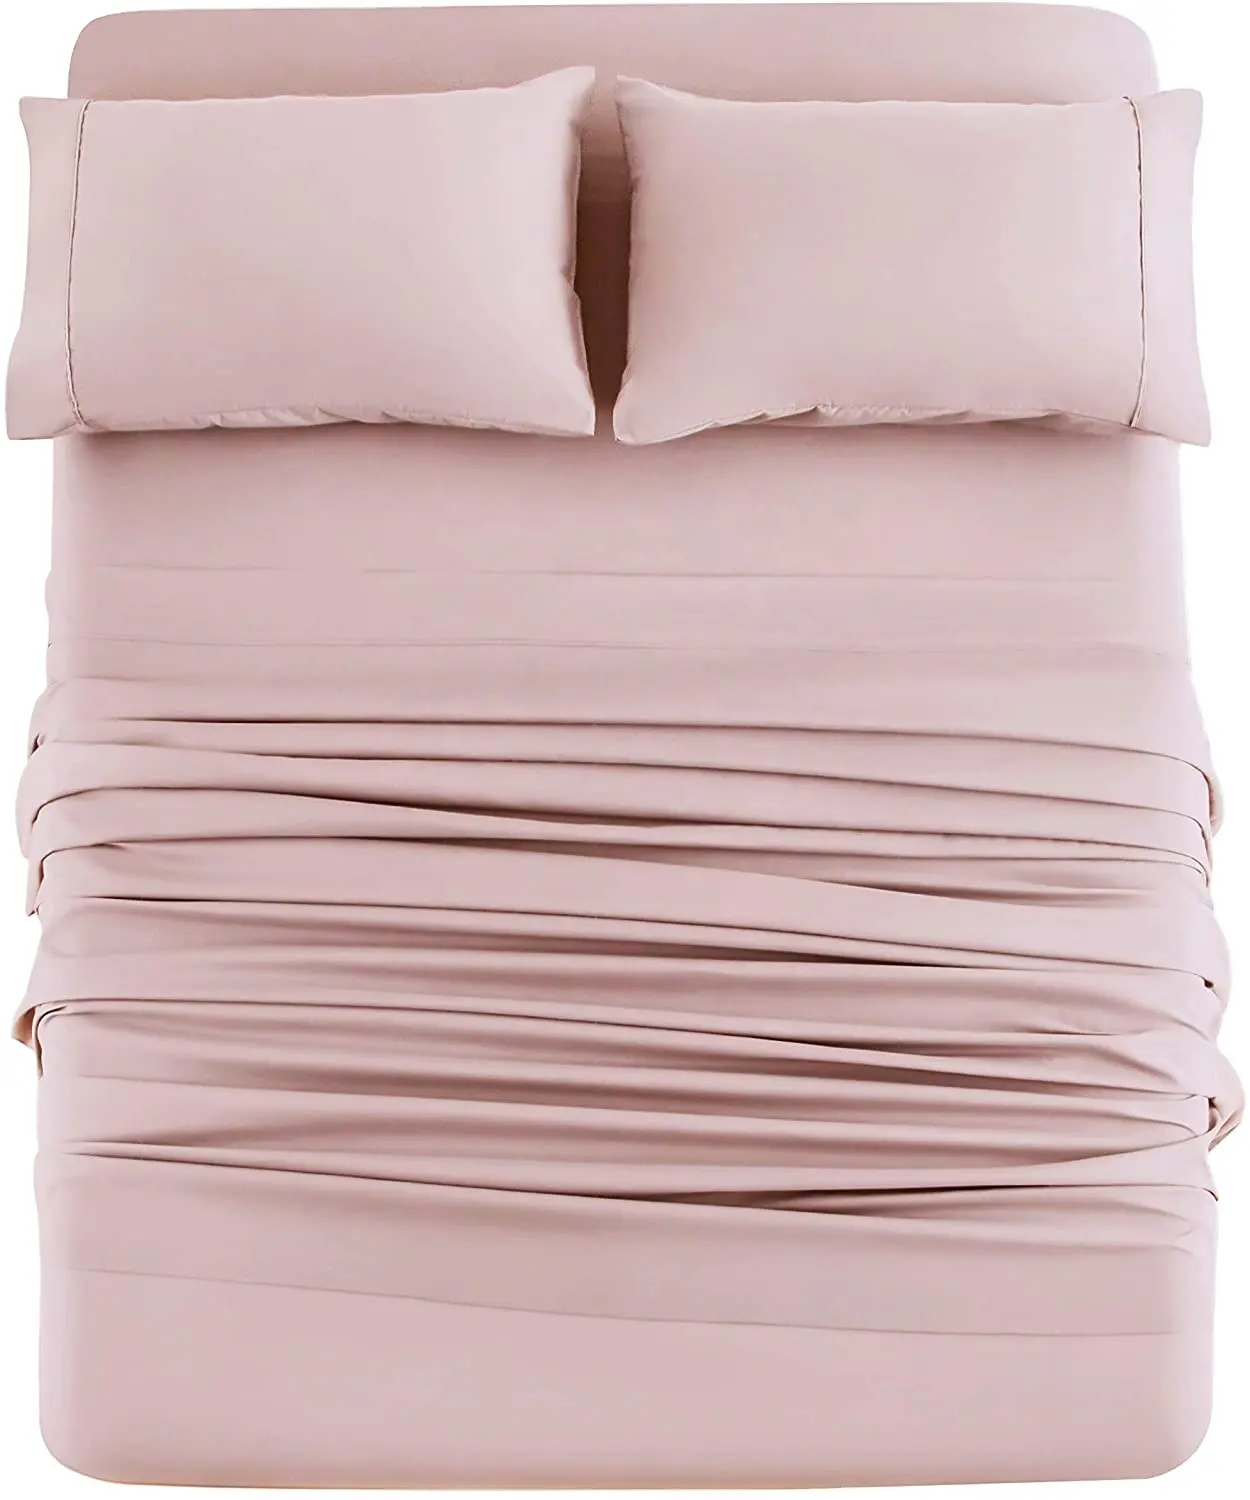 Bed Sheet Set 4 Pieces Brushed Microfiber Luxury with Soft Bedding Fade and Stain Resistant Queen, Blush Pink